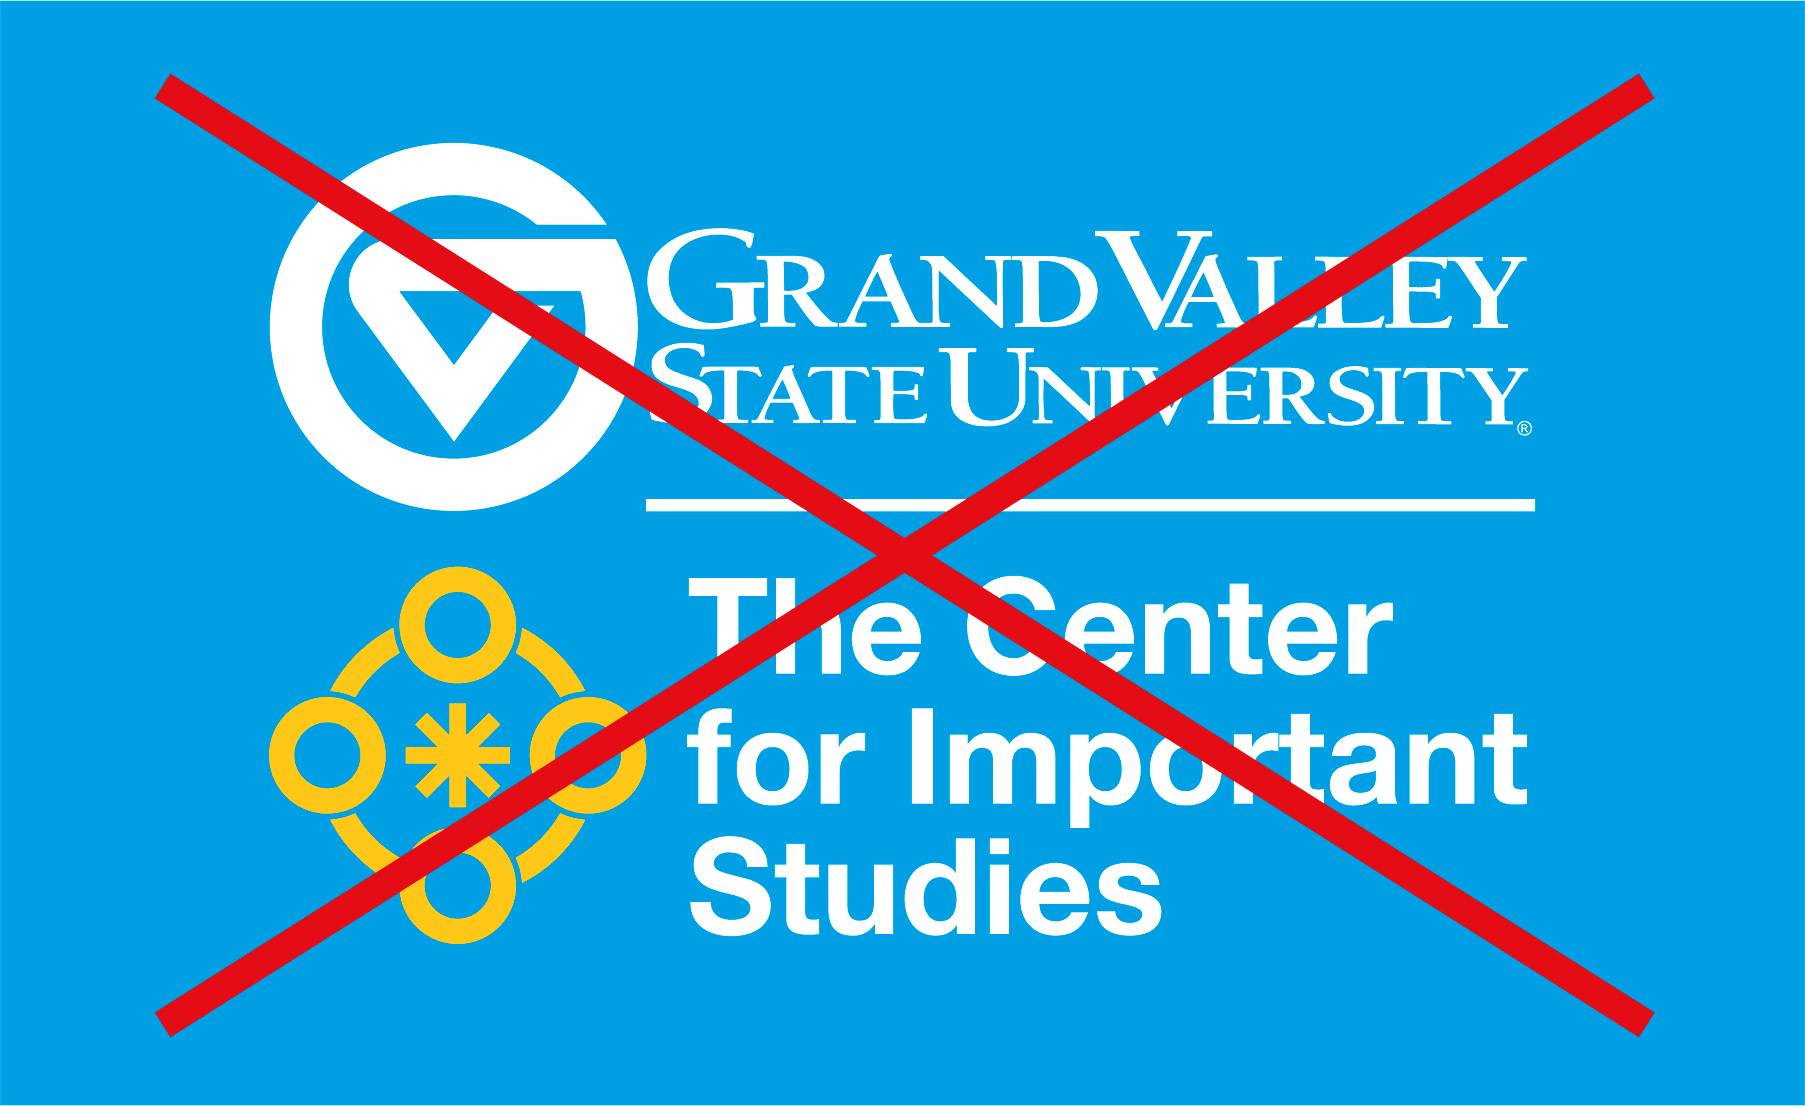 A Grand Valley logo with a line underneath it. A different logo that reads "The Center for Important Studies" is right below the line and the Grand Valley logo. A red X overlays it.